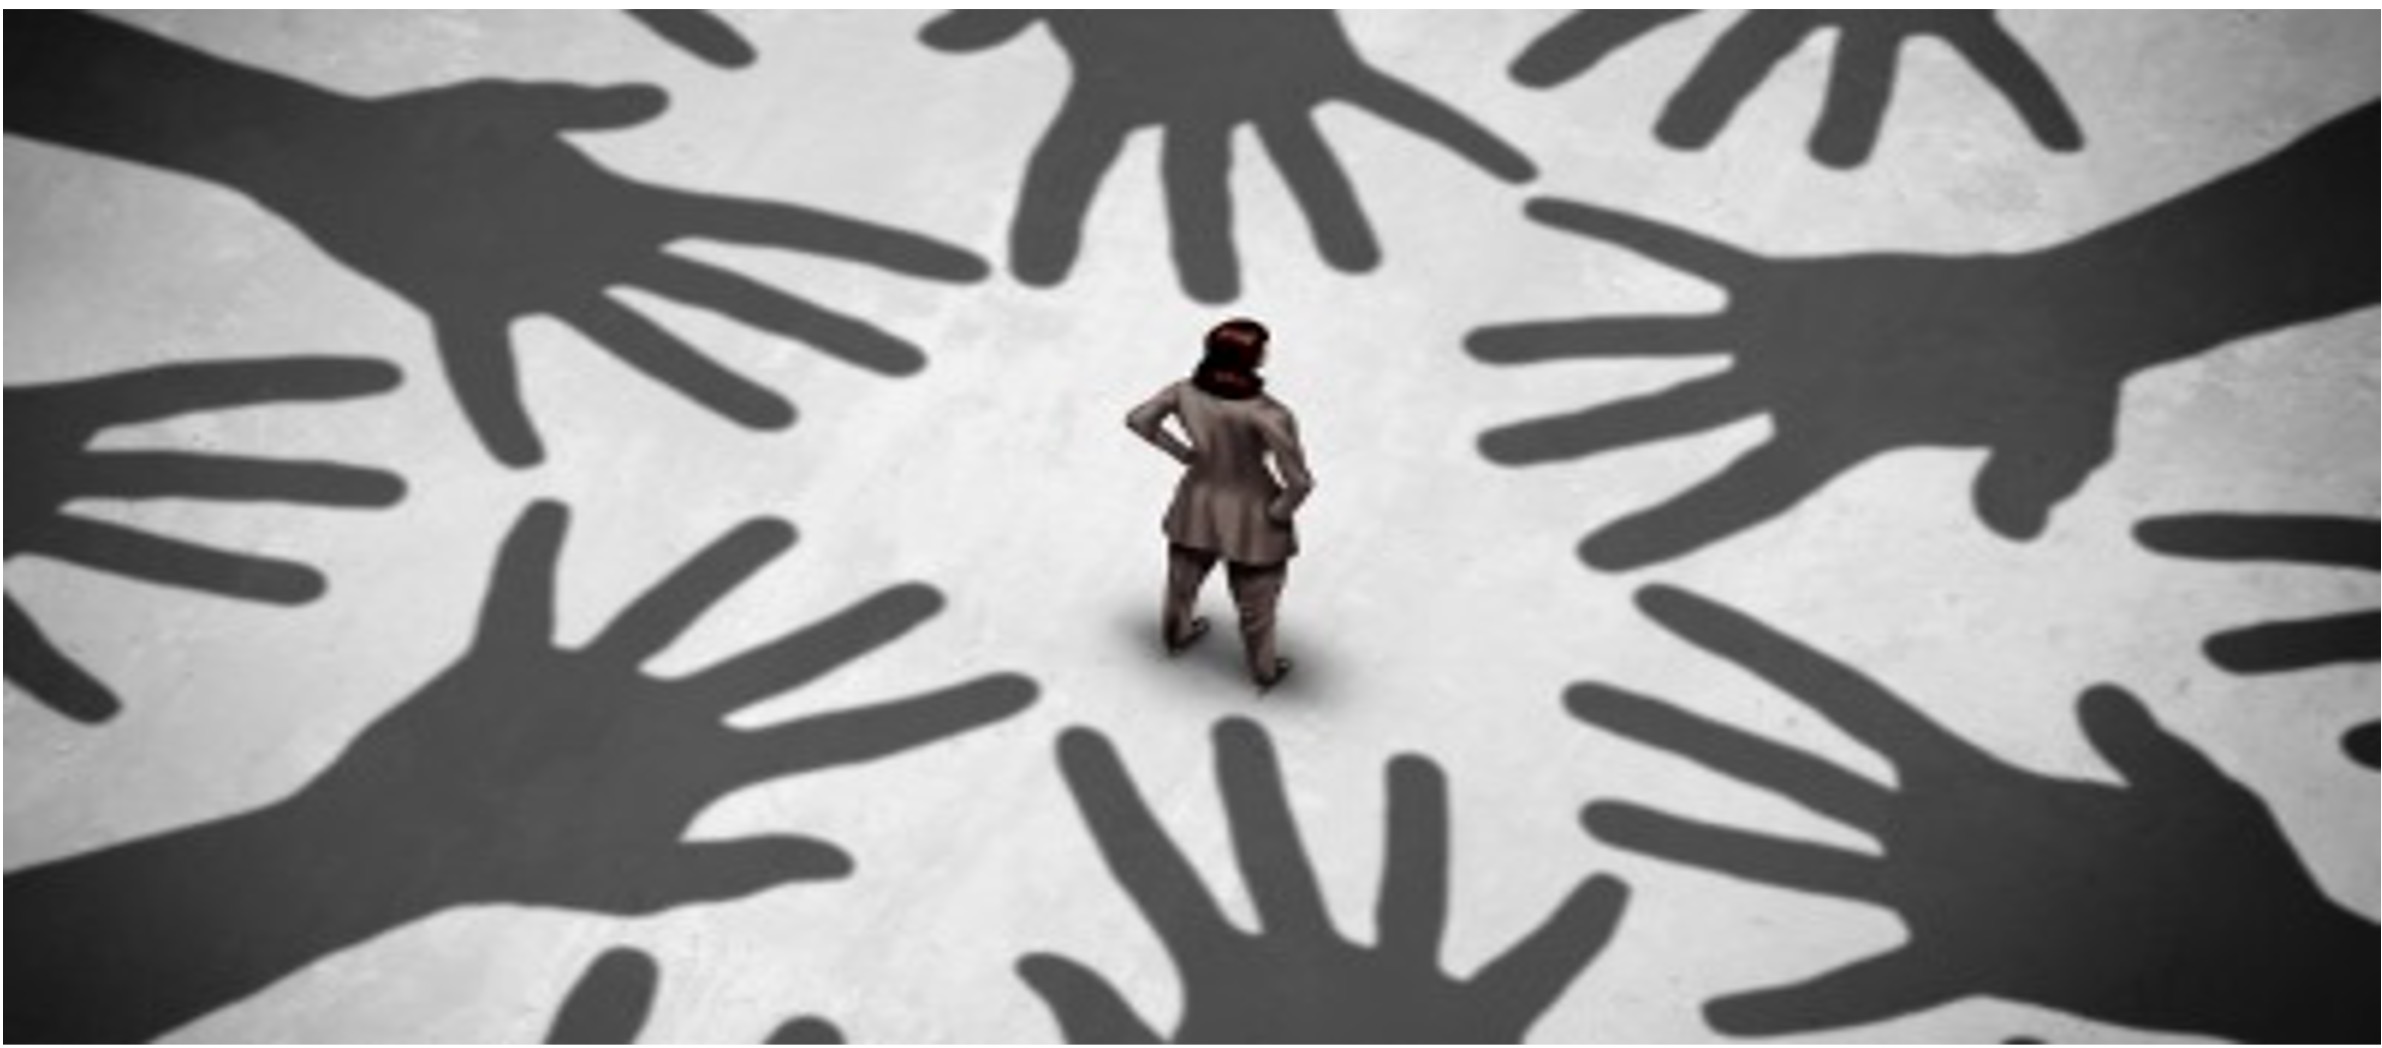 Image of several hands reaching to include a person who is standing alone